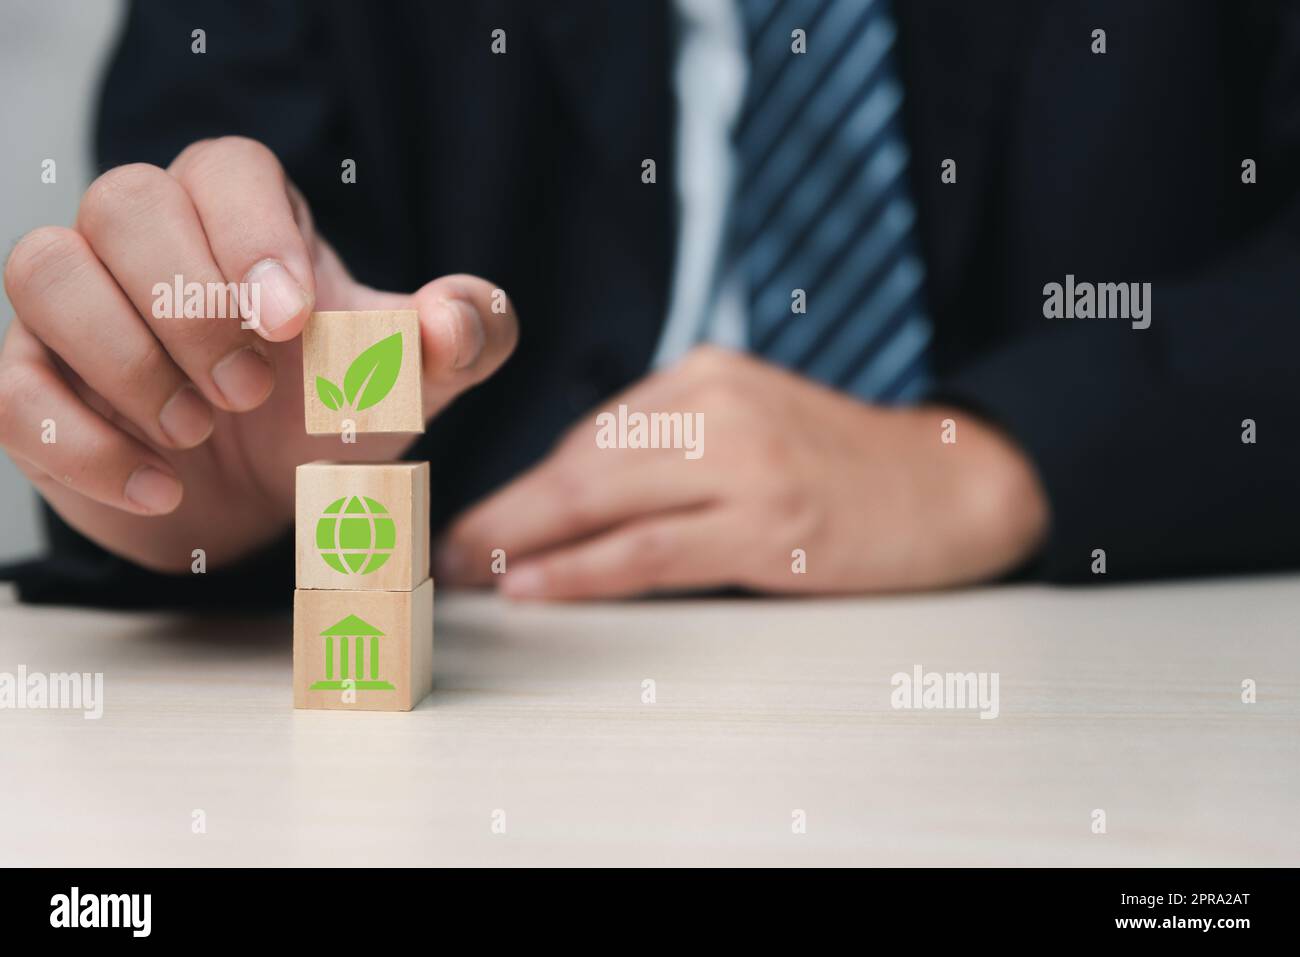 ESG environmental social governance eco green development industrial notion is held in the hands of a businessman. Stock Photo